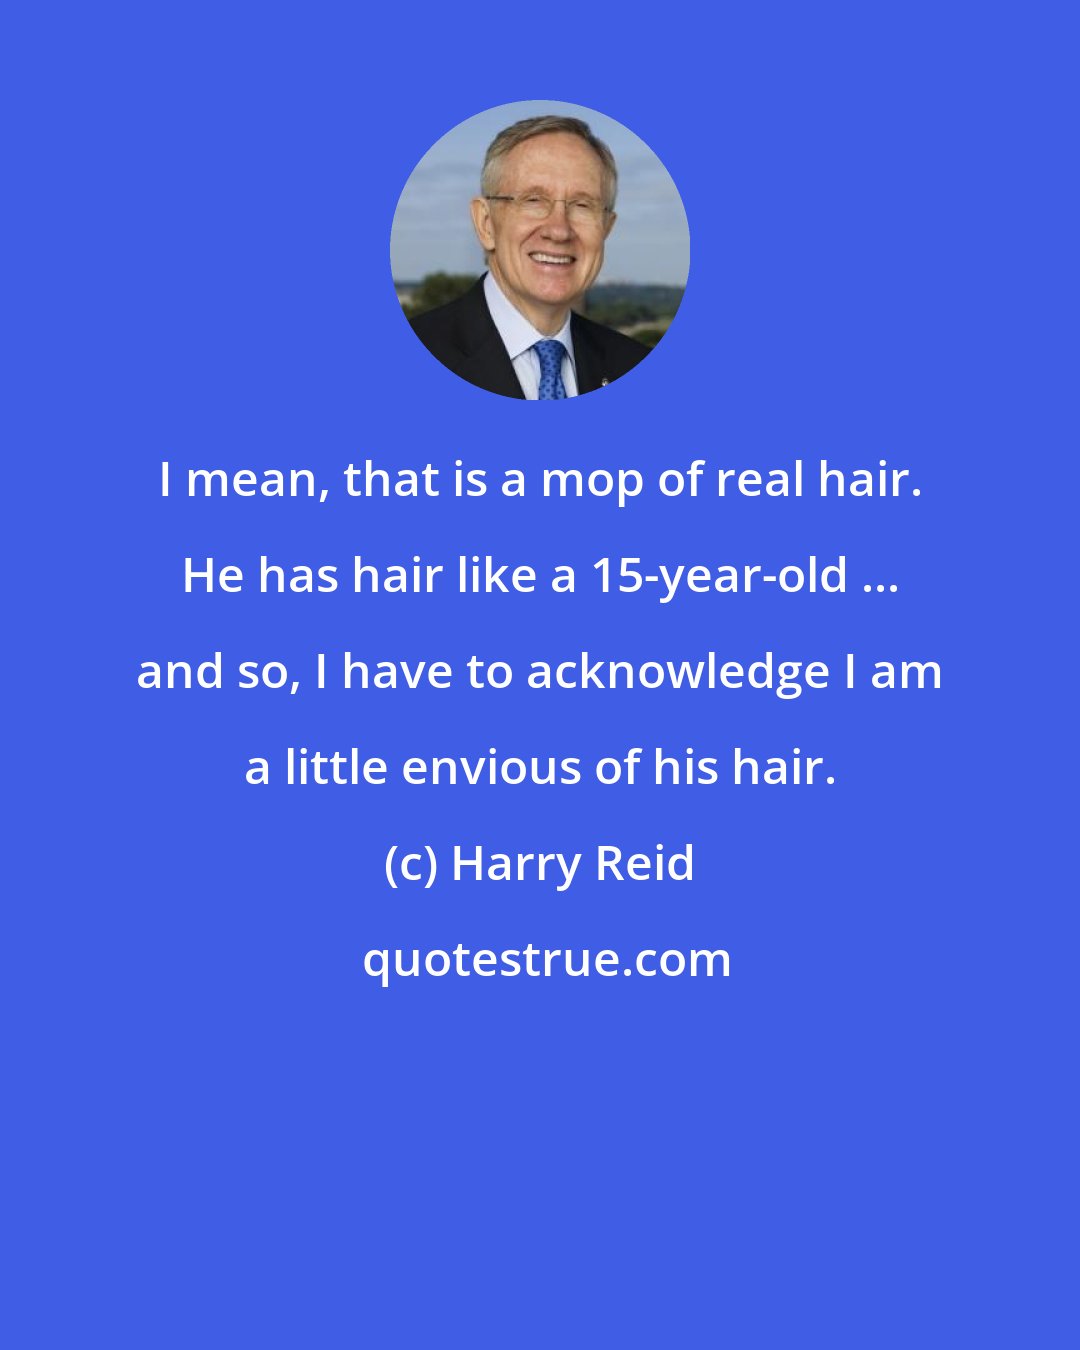 Harry Reid: I mean, that is a mop of real hair. He has hair like a 15-year-old ... and so, I have to acknowledge I am a little envious of his hair.